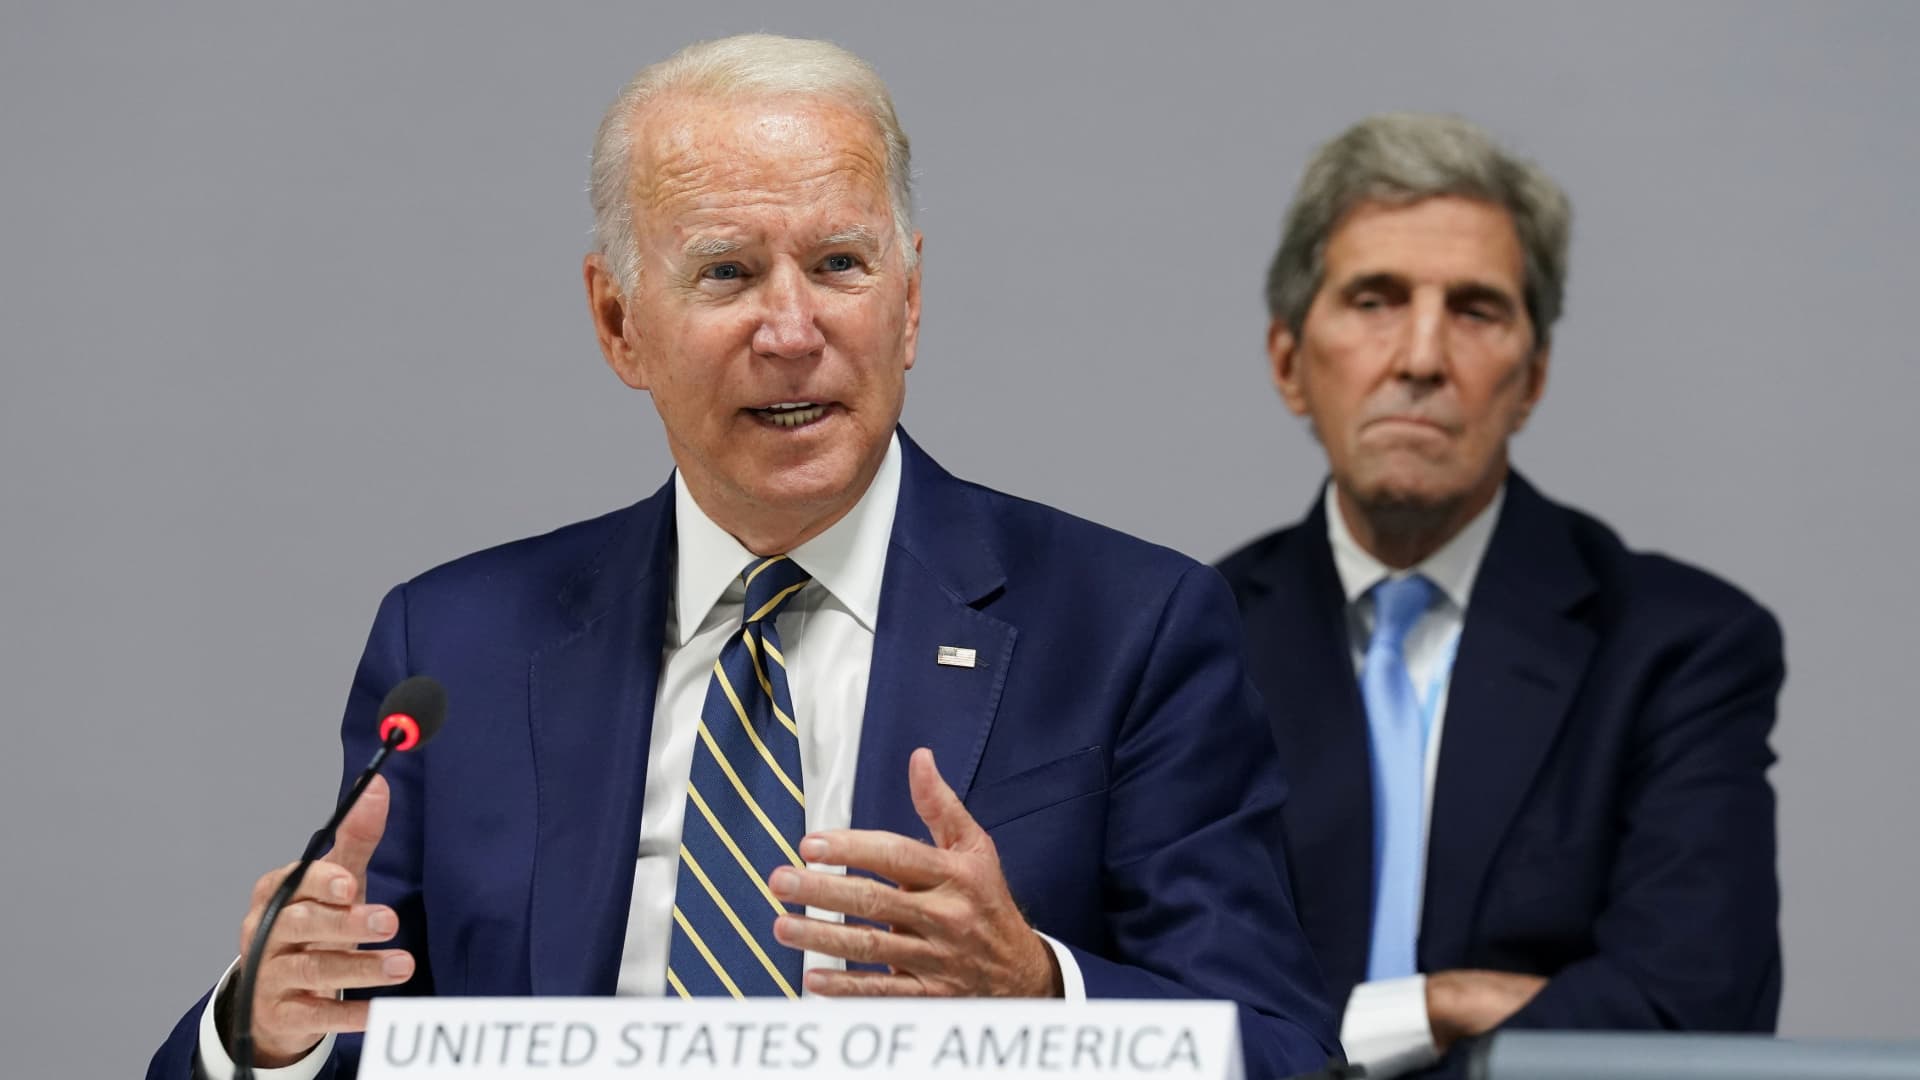 U.S. President Joe Biden and U.S. Climate Adviser John Kerry attend an event on action and solidarity at the UN Climate Change Conference (COP26) in Glasgow, Scotland, Britain, November 1, 2021.